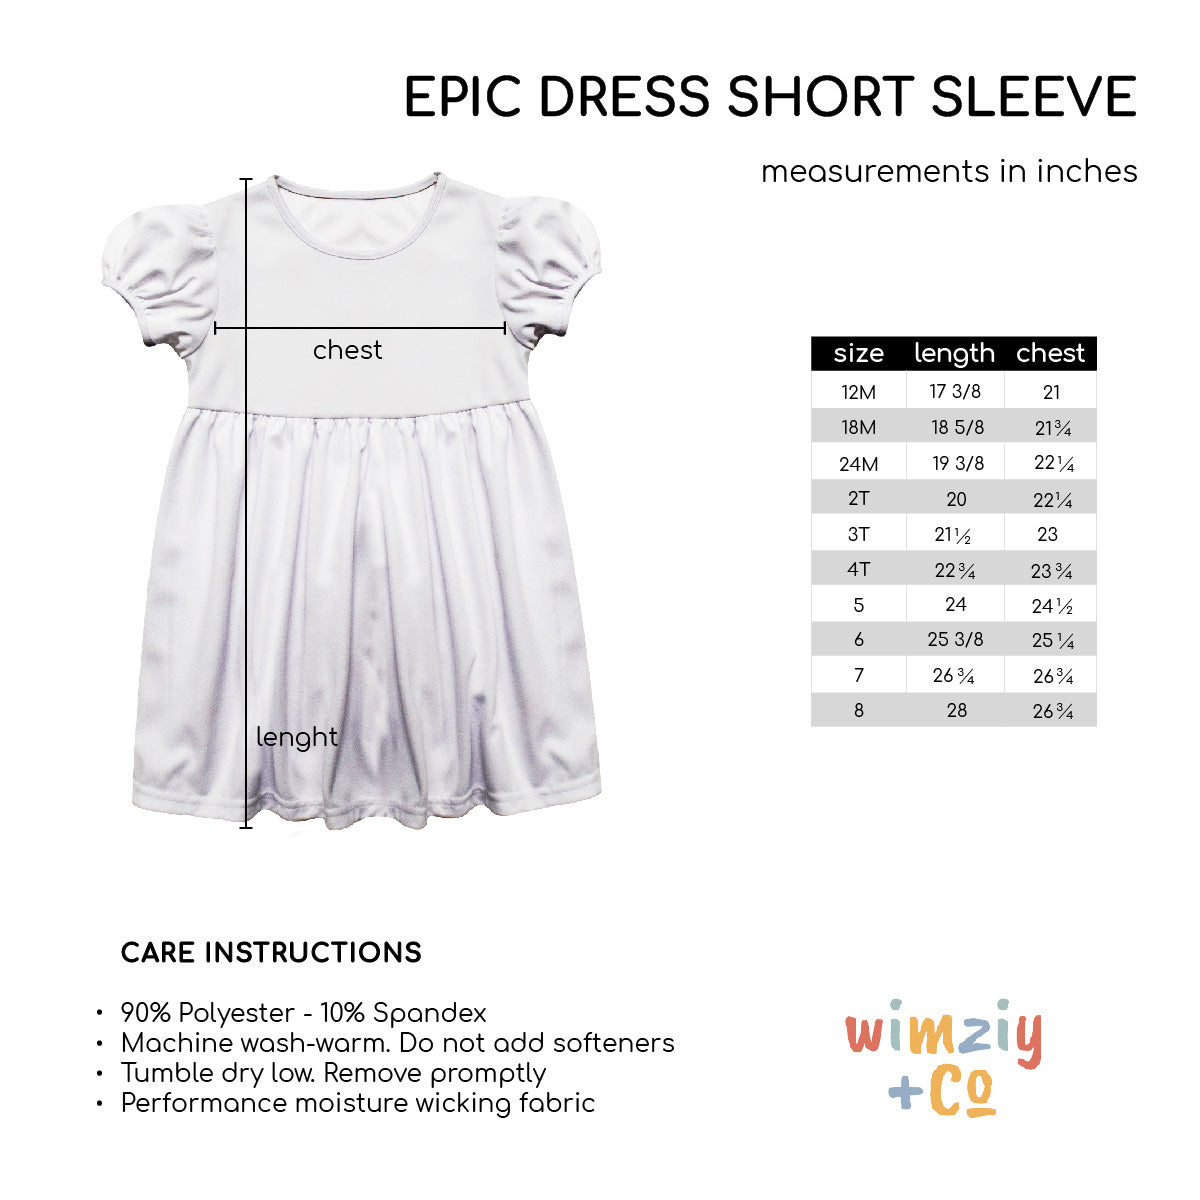 Butterfly Name Blue Short Sleeve Epic Dress - Wimziy&Co.